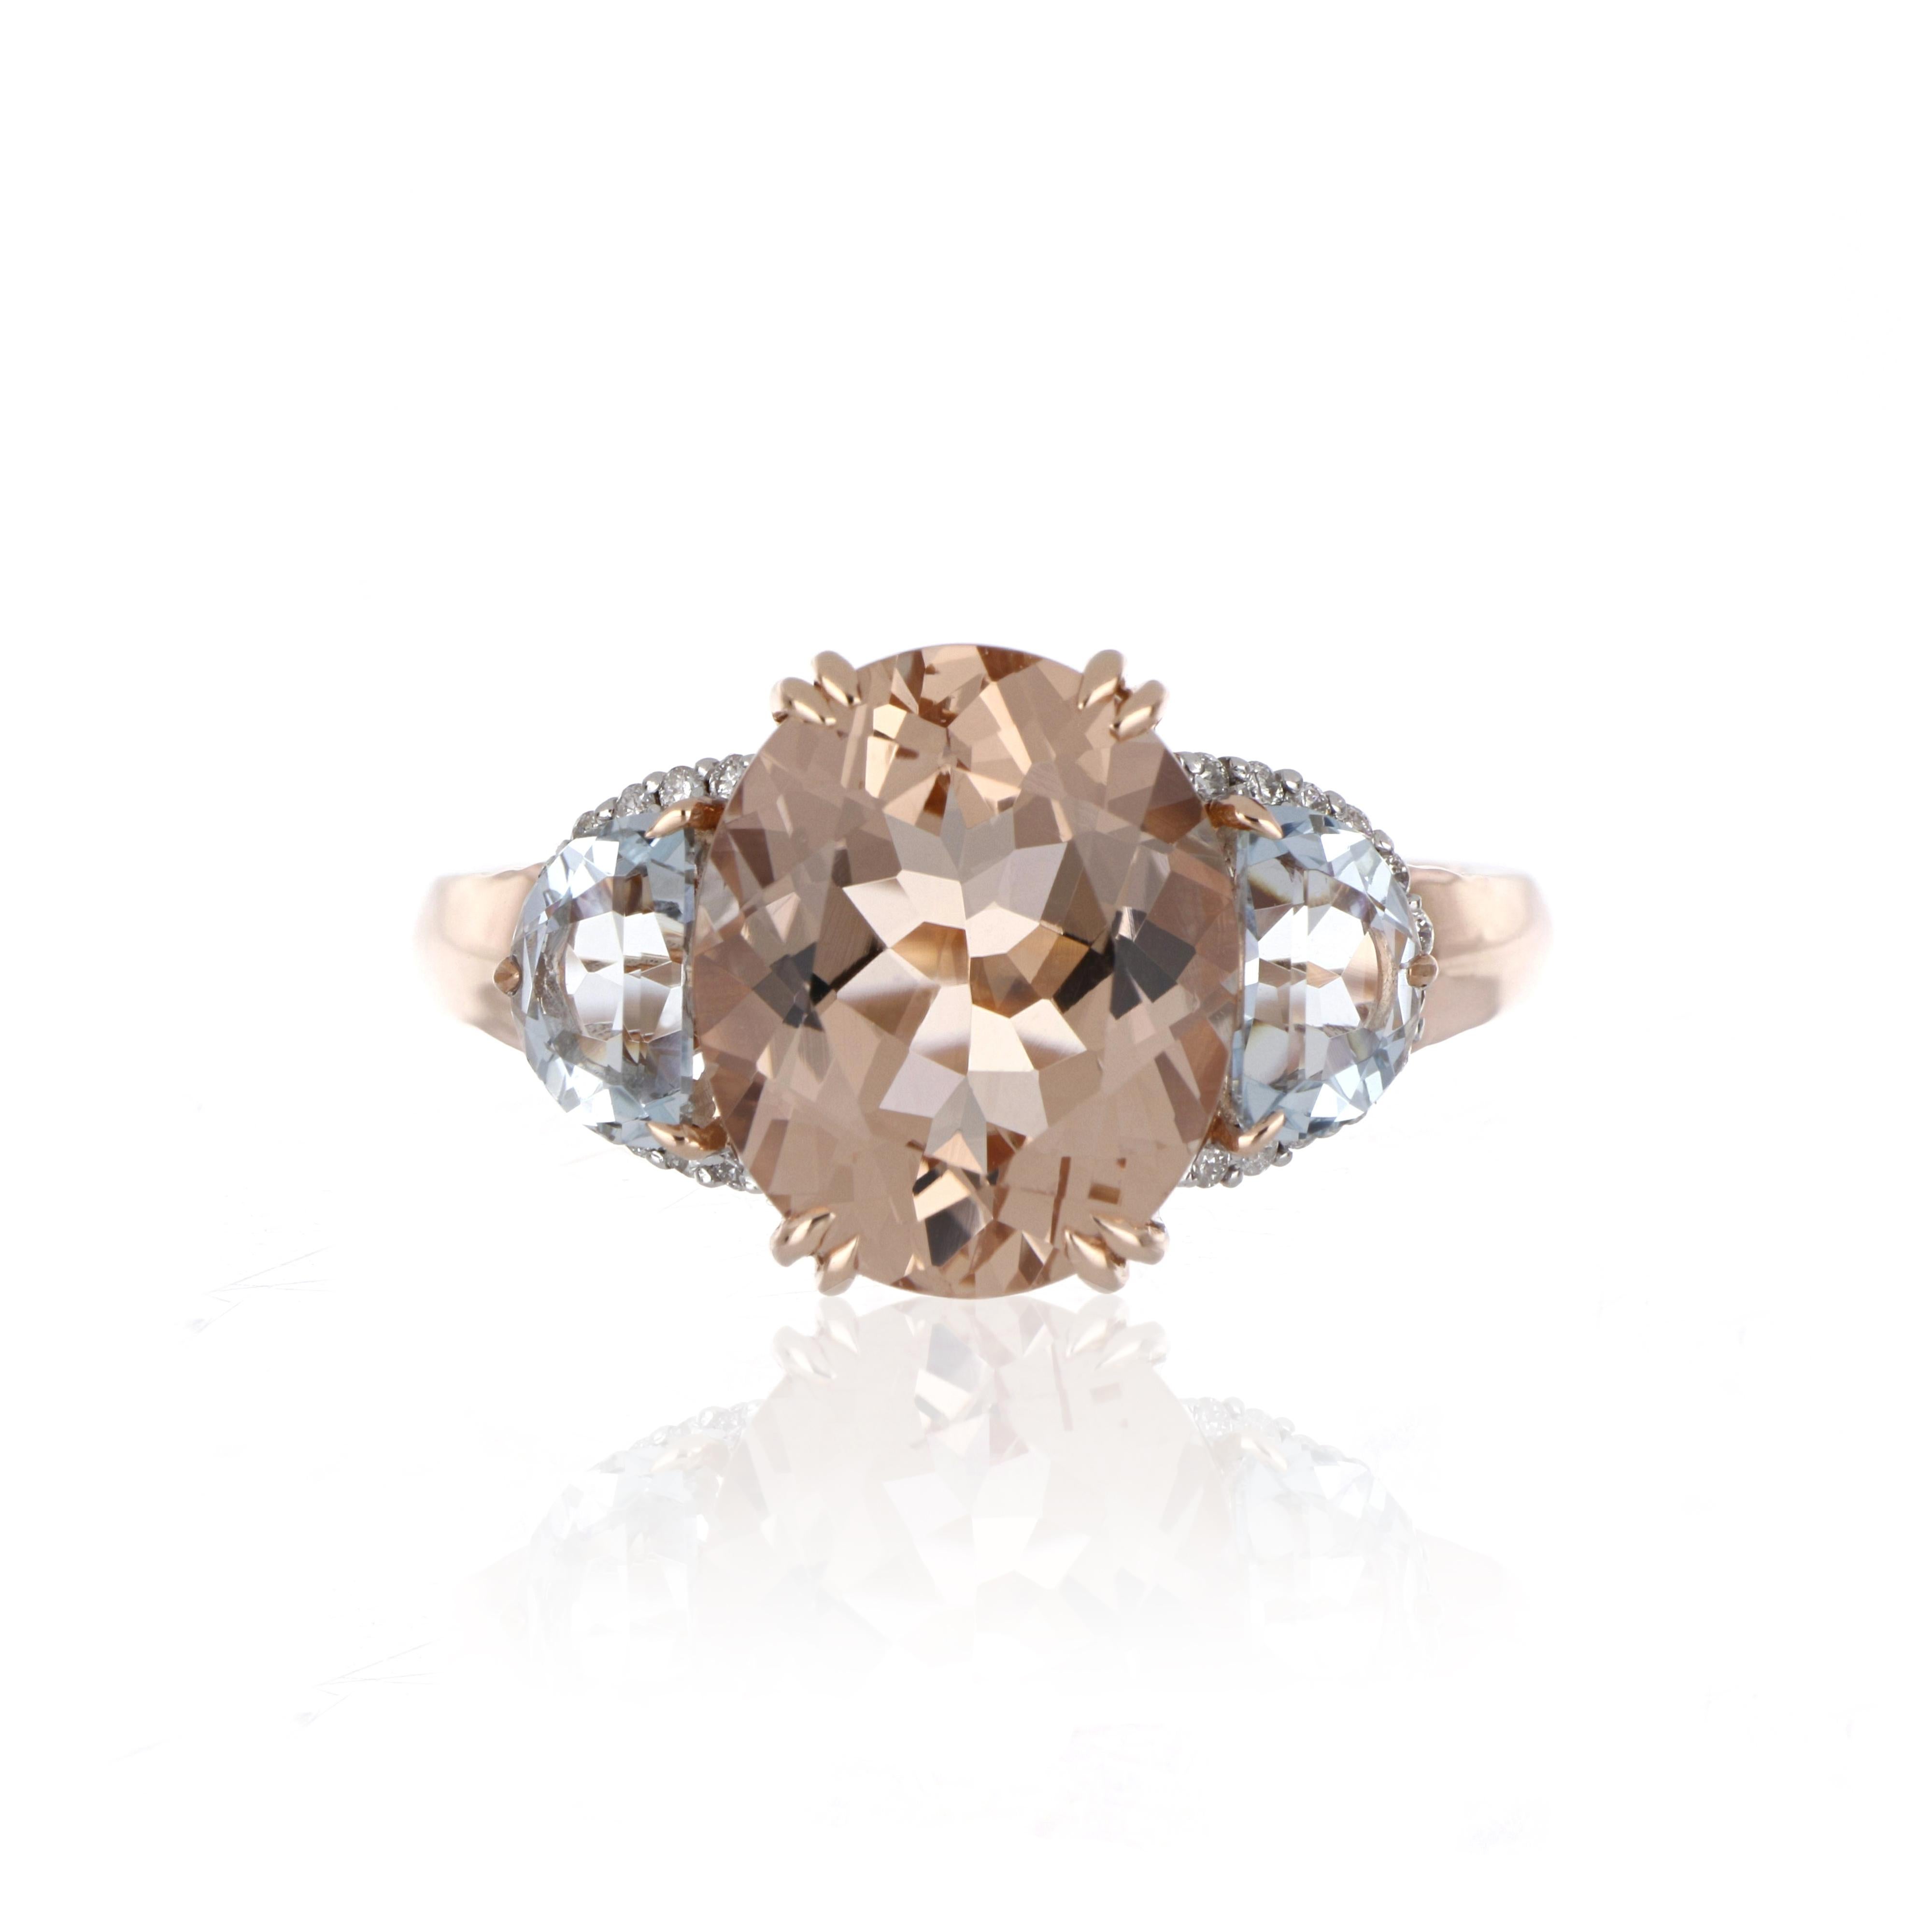 Elegant and exquisitely detailed three stone Cocktail 14K Ring, centre set with 3.98 Ct Oval Morganite and 0.95 Ct Half Moon Cut Aquamarine, surrounded by Diamonds, weighing approx. 0.11 cts. total carat weight. Beautifully Hand crafted in 14 Karat